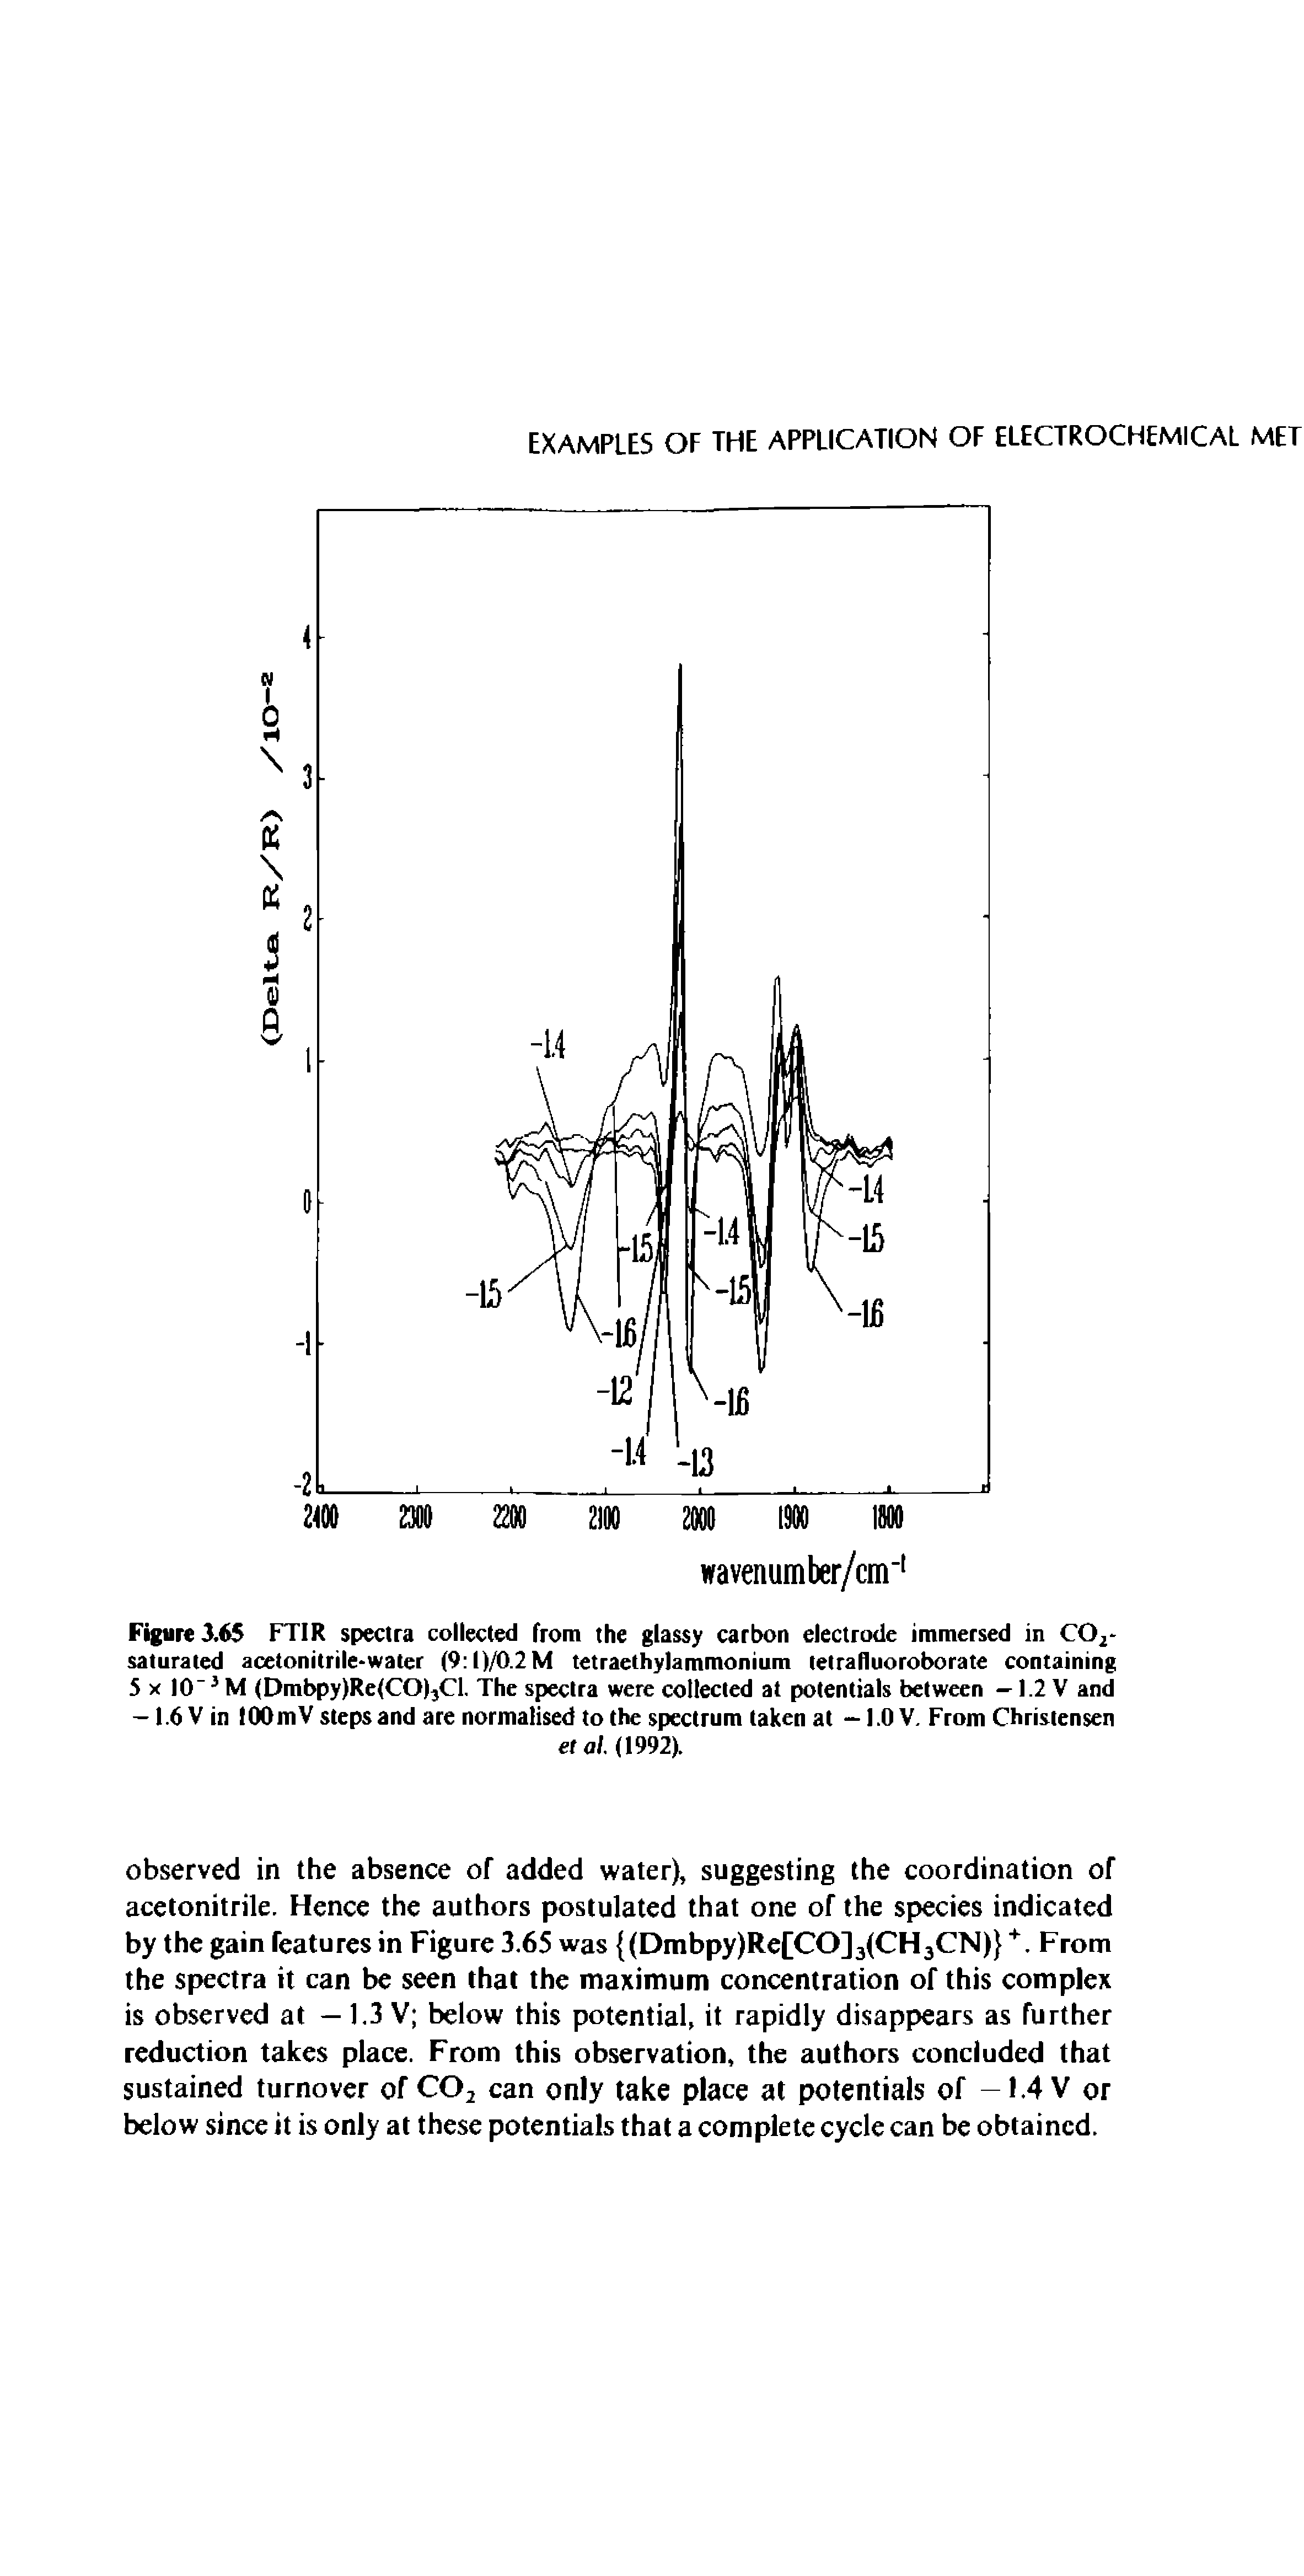 Figure 3.65 FTIR spectra collected from the glassy carbon electrode immersed in COr saturated acetonitrile-water (9 l)/0.2M tetraethylammonium letrafluoroborate containing 5 x 10 3 M (Dmbpy)Re(CO)3Cl. The spectra were collected at potentials between —1.2 V and —1.6 V in lOOmV steps and are normalised to the spectrum taken at —1.0 V. From Christensen...